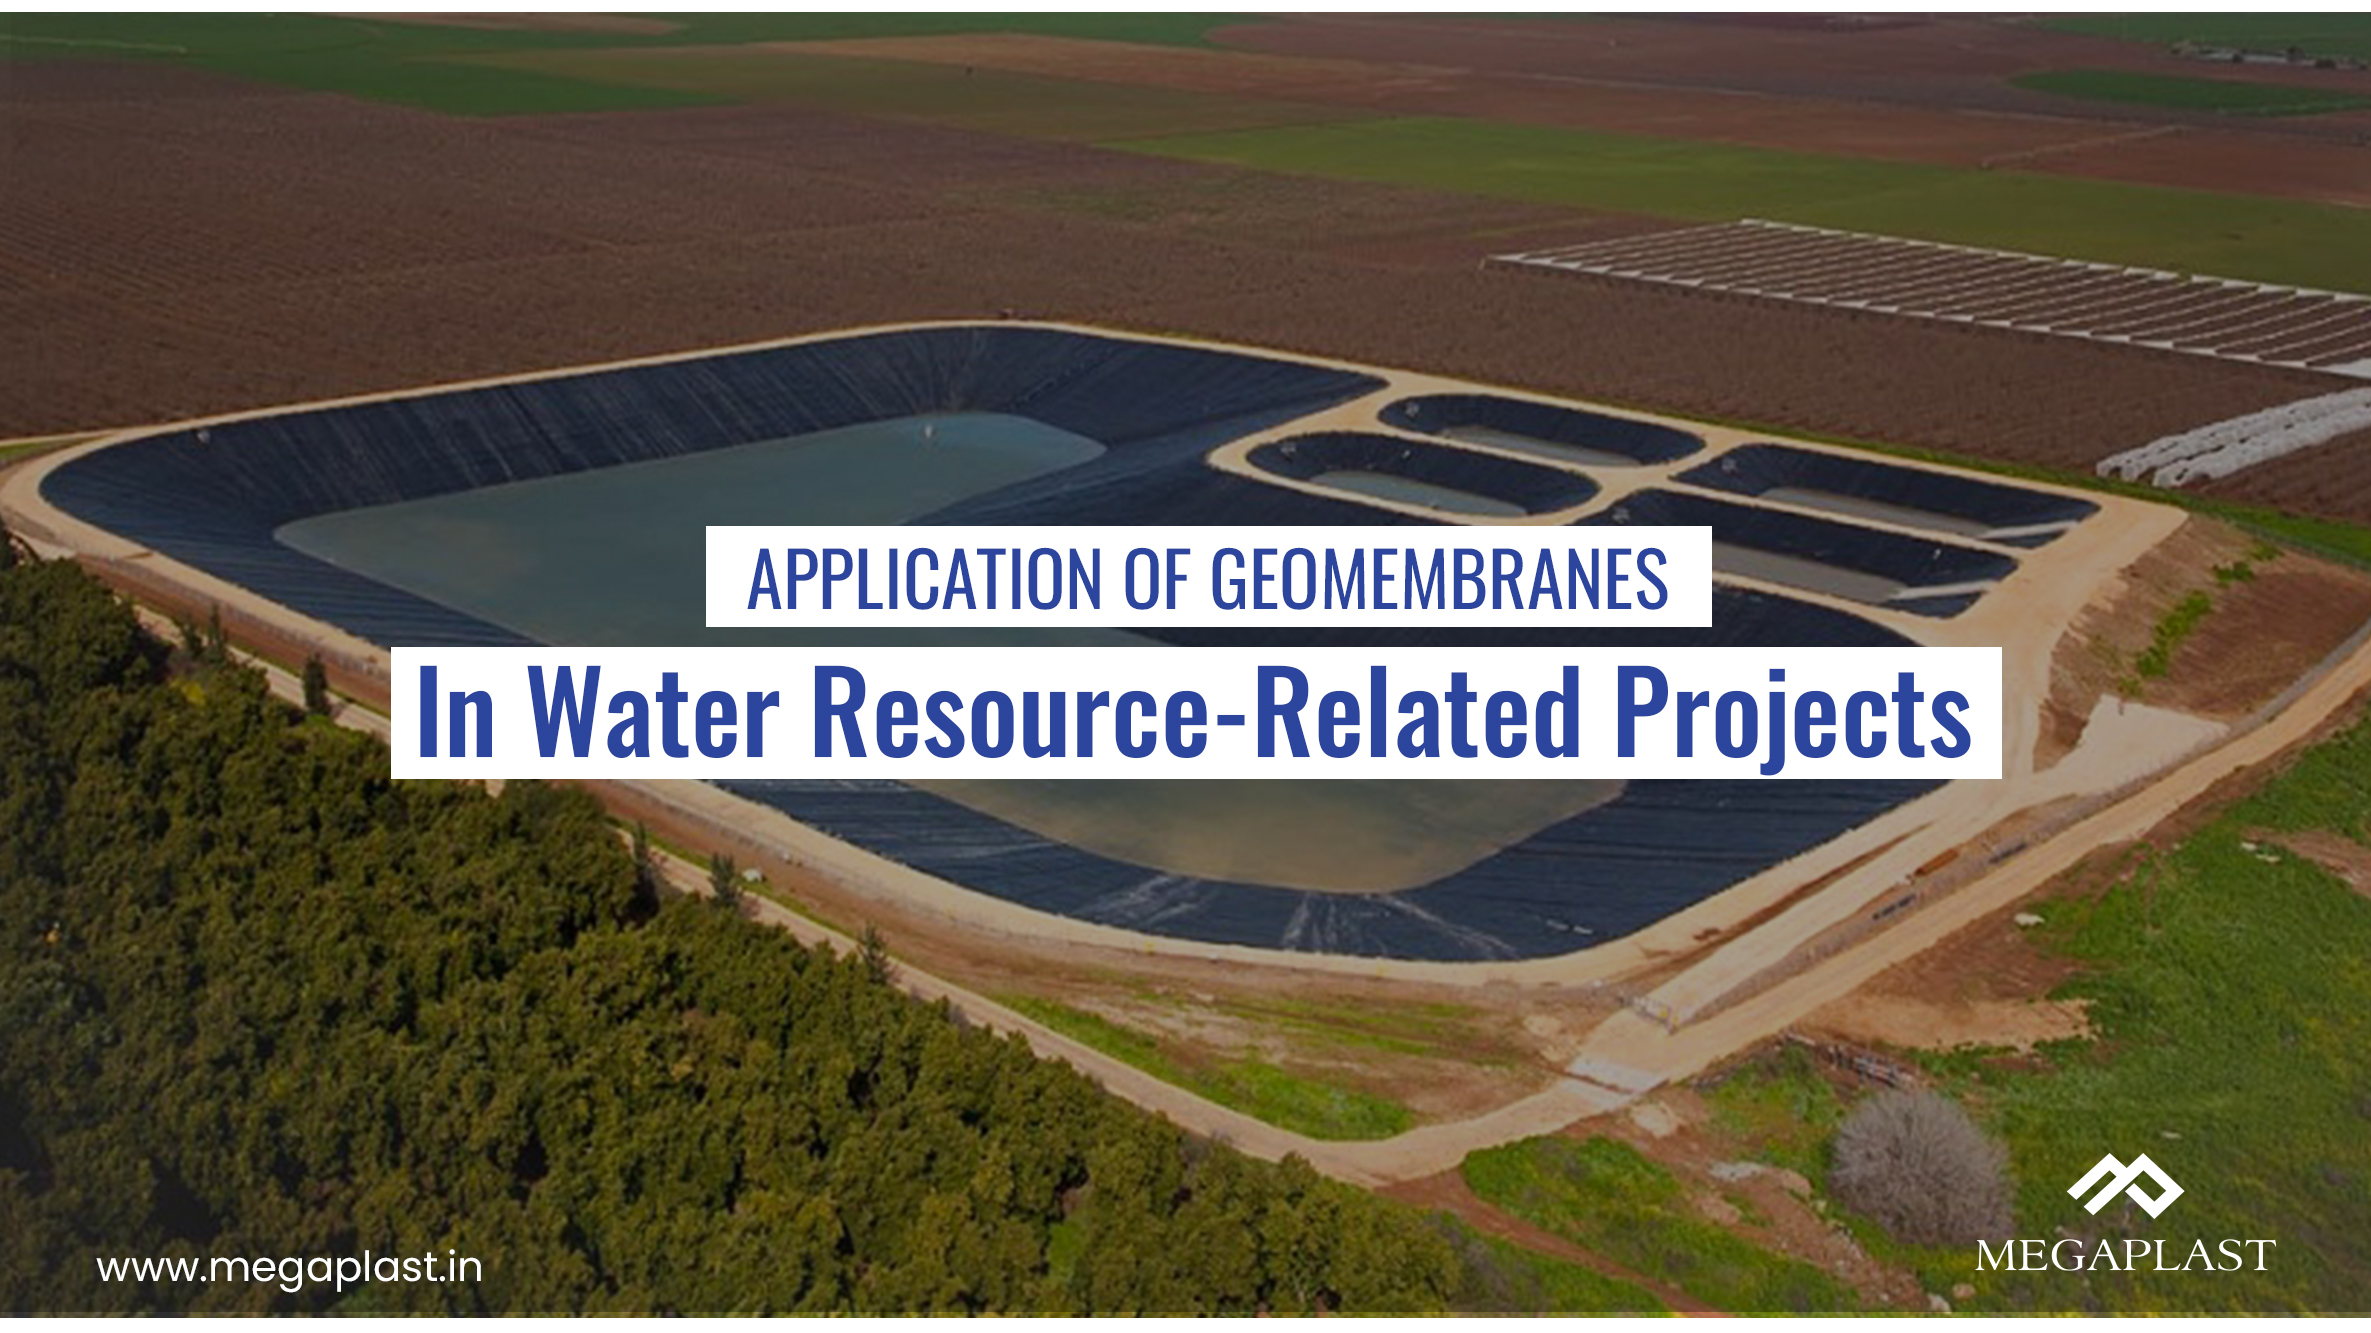 Application of geomembranes in water resource-related projects